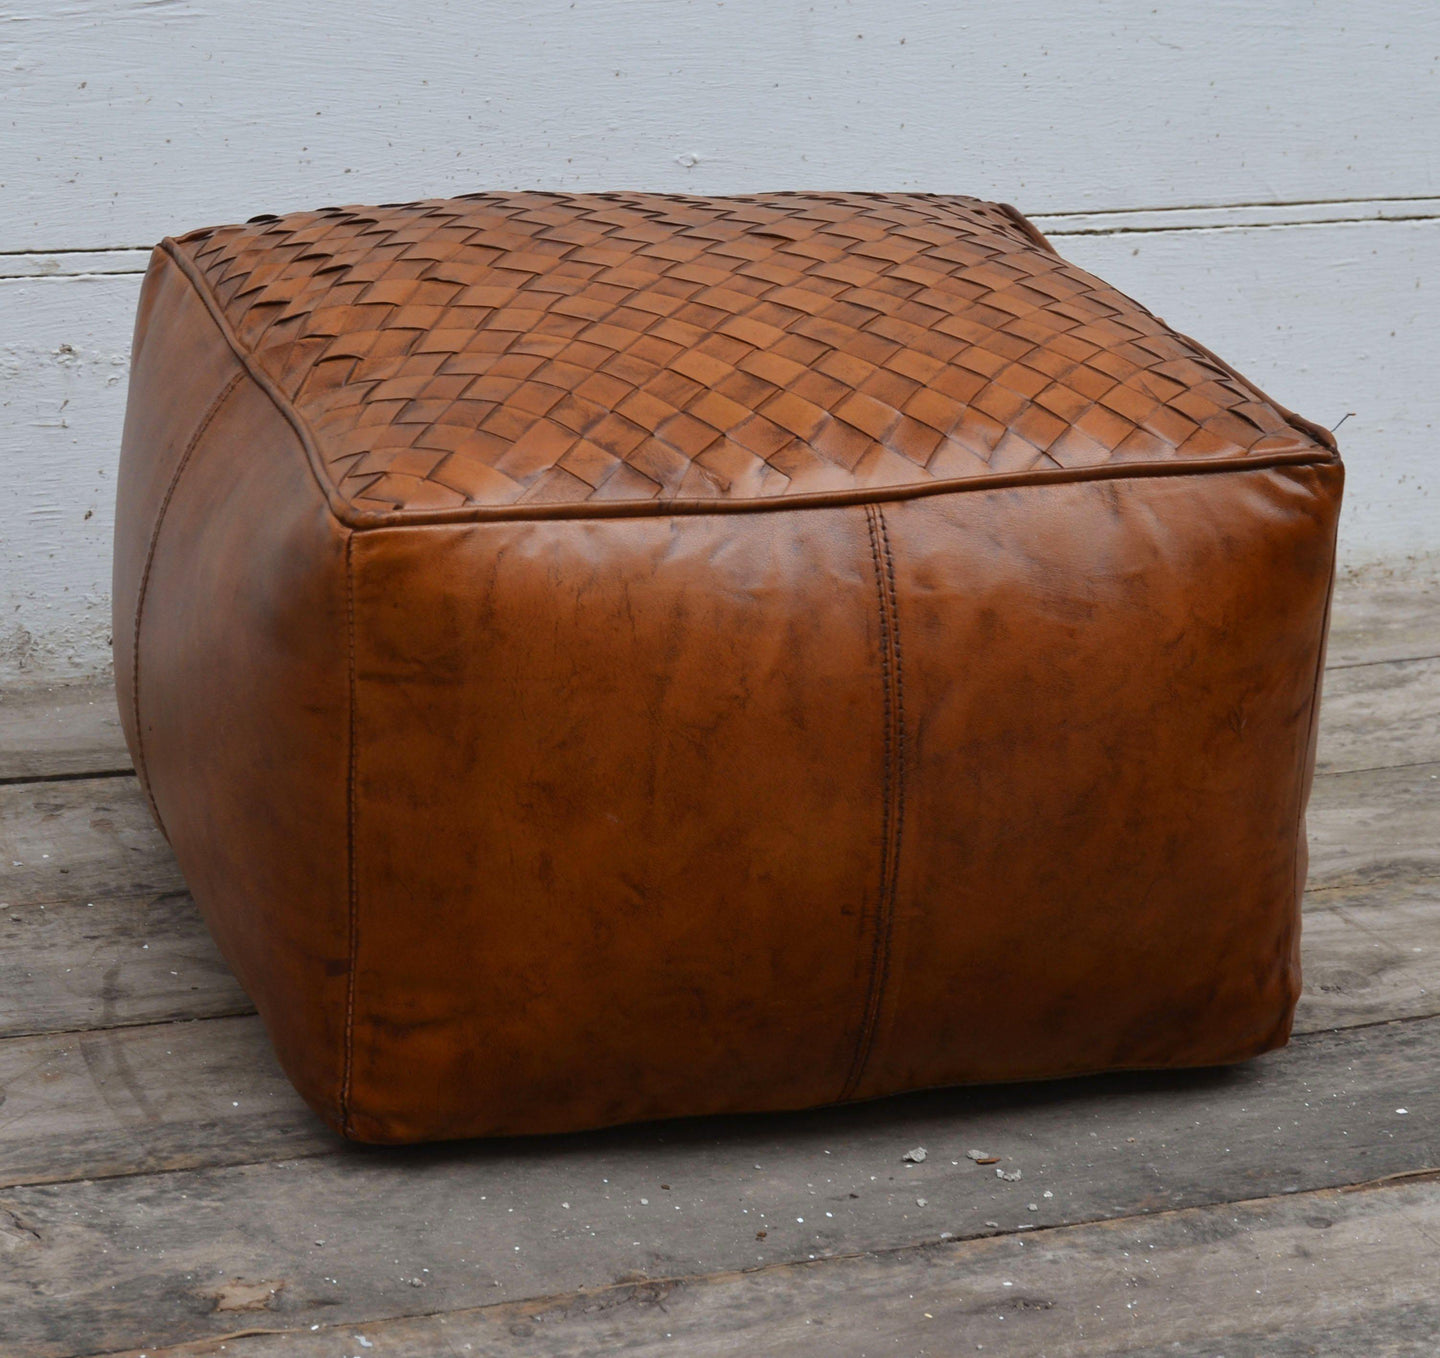 Lounge Styles Phil Bee Square Latticed Leather and Cotton Filling Ottoman